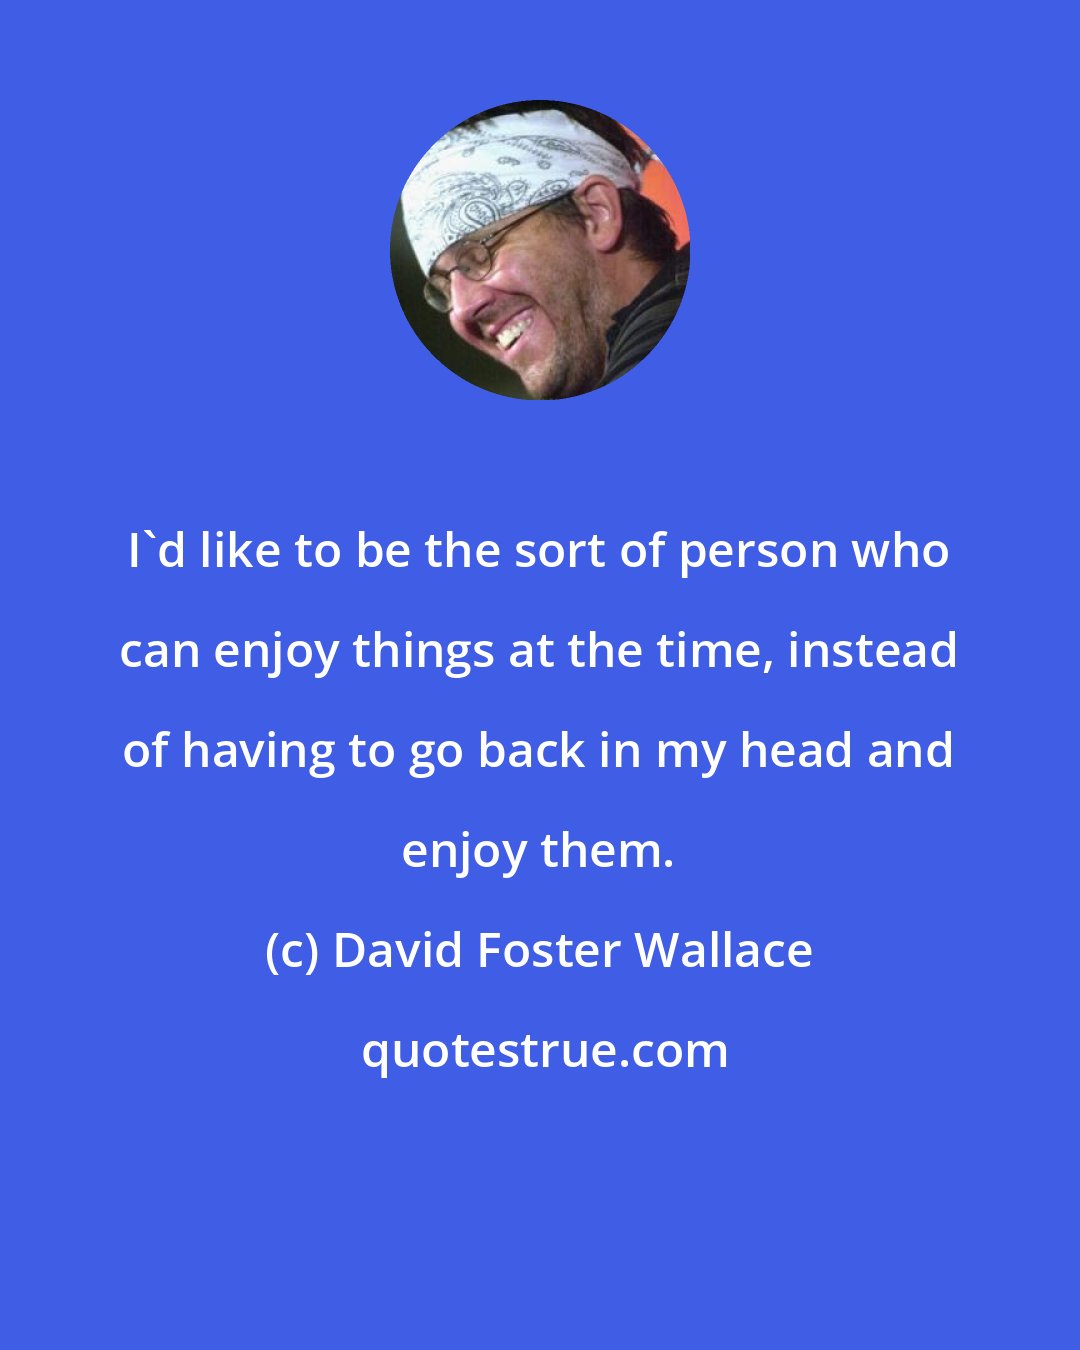 David Foster Wallace: I'd like to be the sort of person who can enjoy things at the time, instead of having to go back in my head and enjoy them.